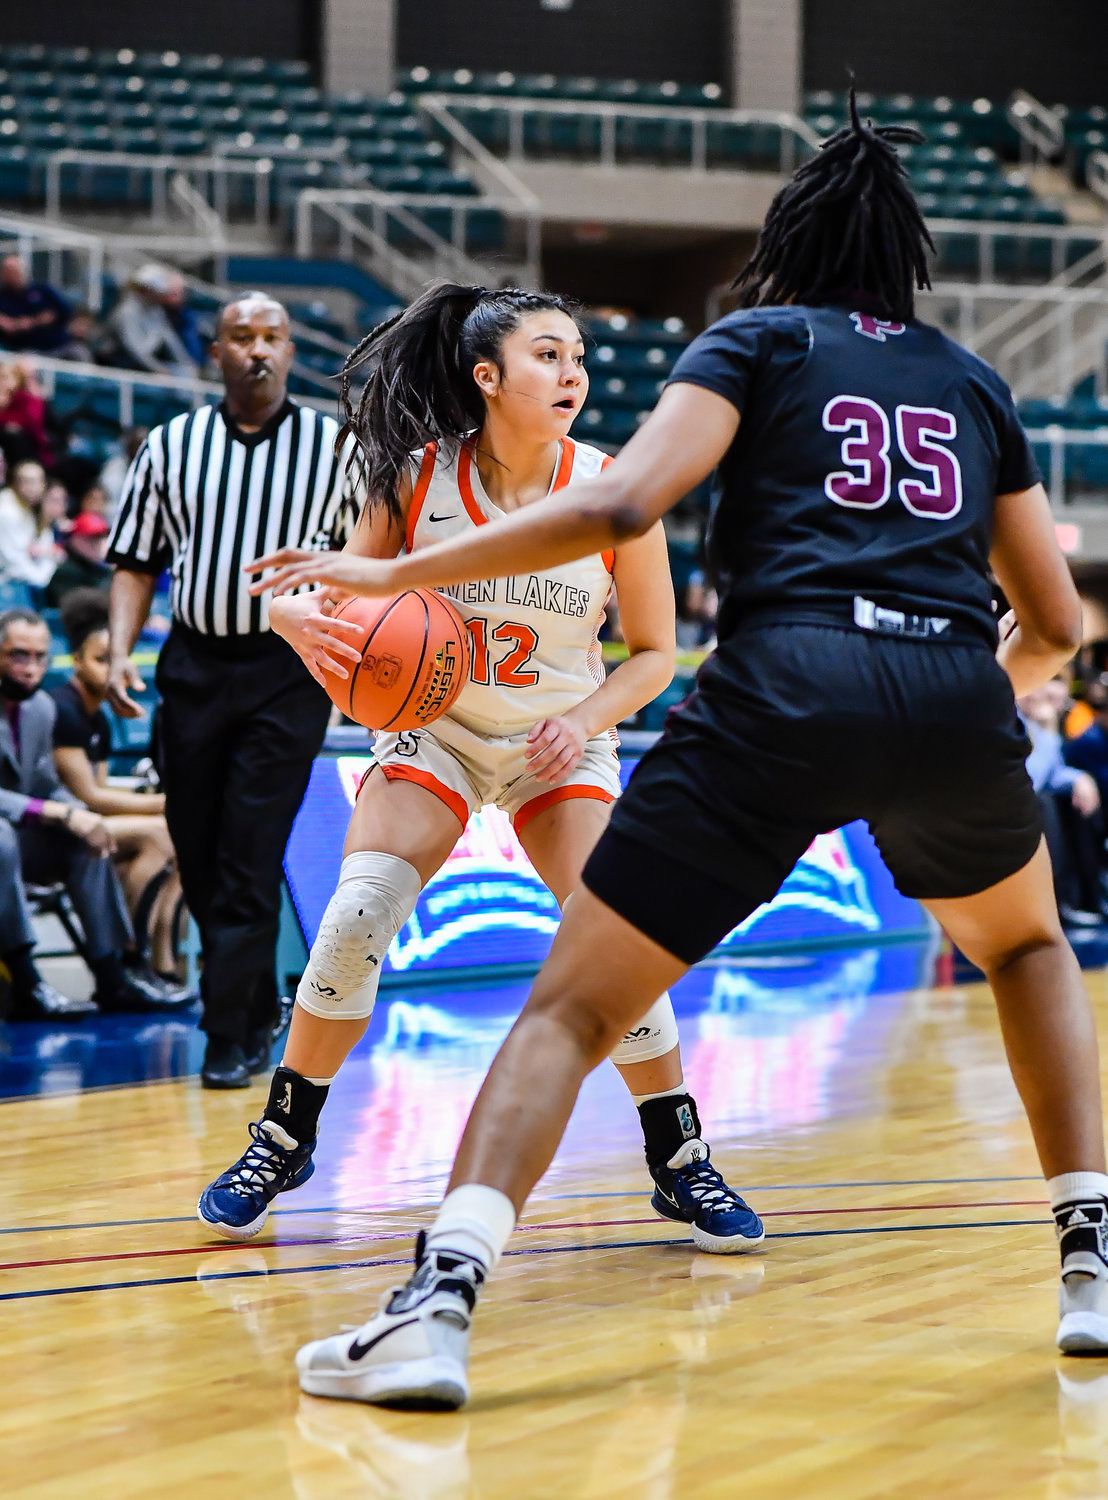 Katy Tx. Feb 25, 2022:  Seven Lakes Cailyn Tucker #12 looks for an open player during the Regional SemiFinal playoff game, Seven Lakes vs Pearland at the Merrell Center. (Photo by Mark Goodman / Katy Times)